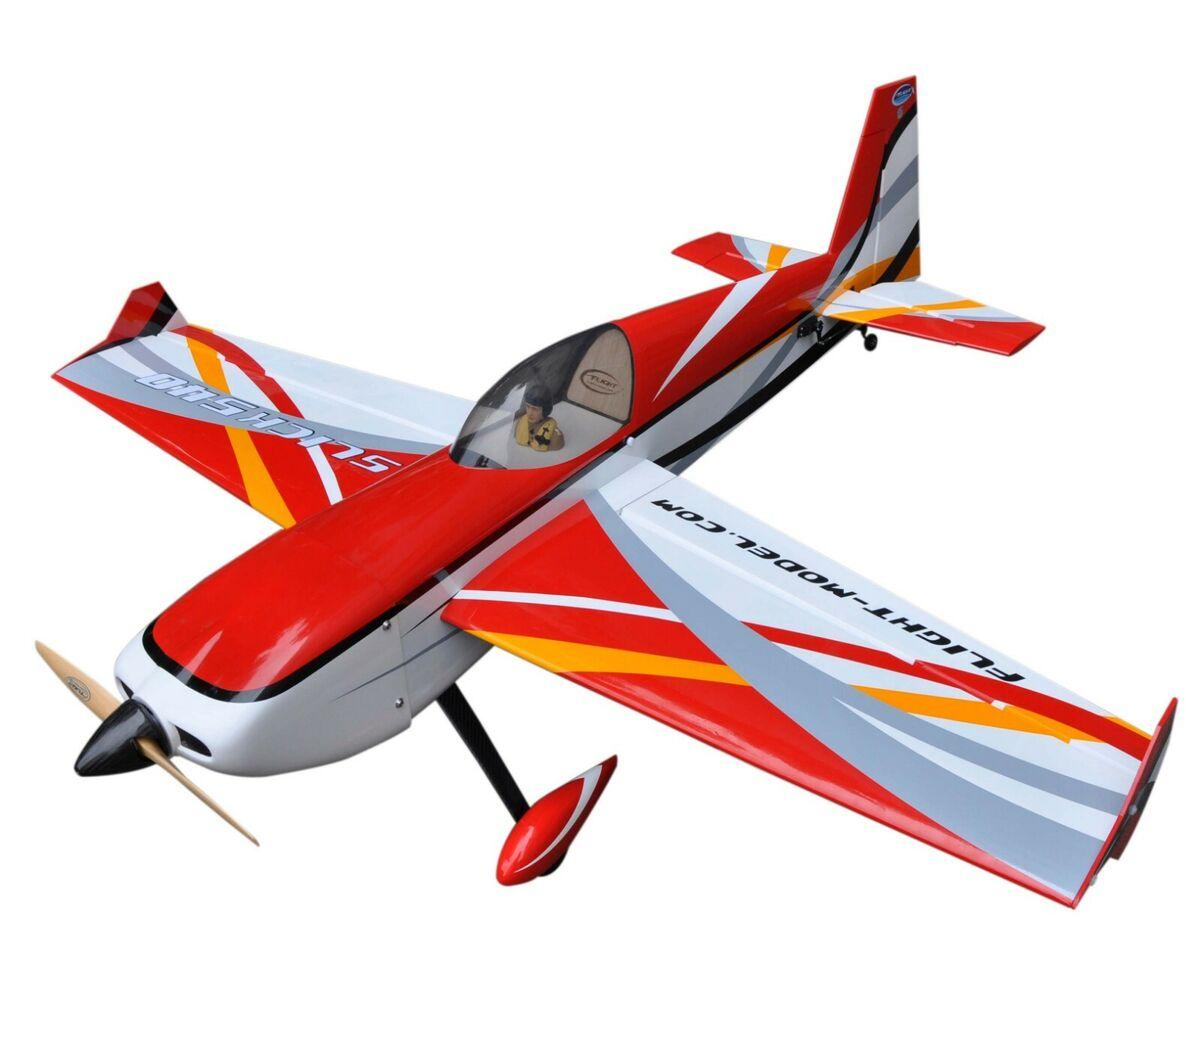 20Cc Rc Plane Arf: Maximize Your Flying Experience with a 20cc RC Plane ARF